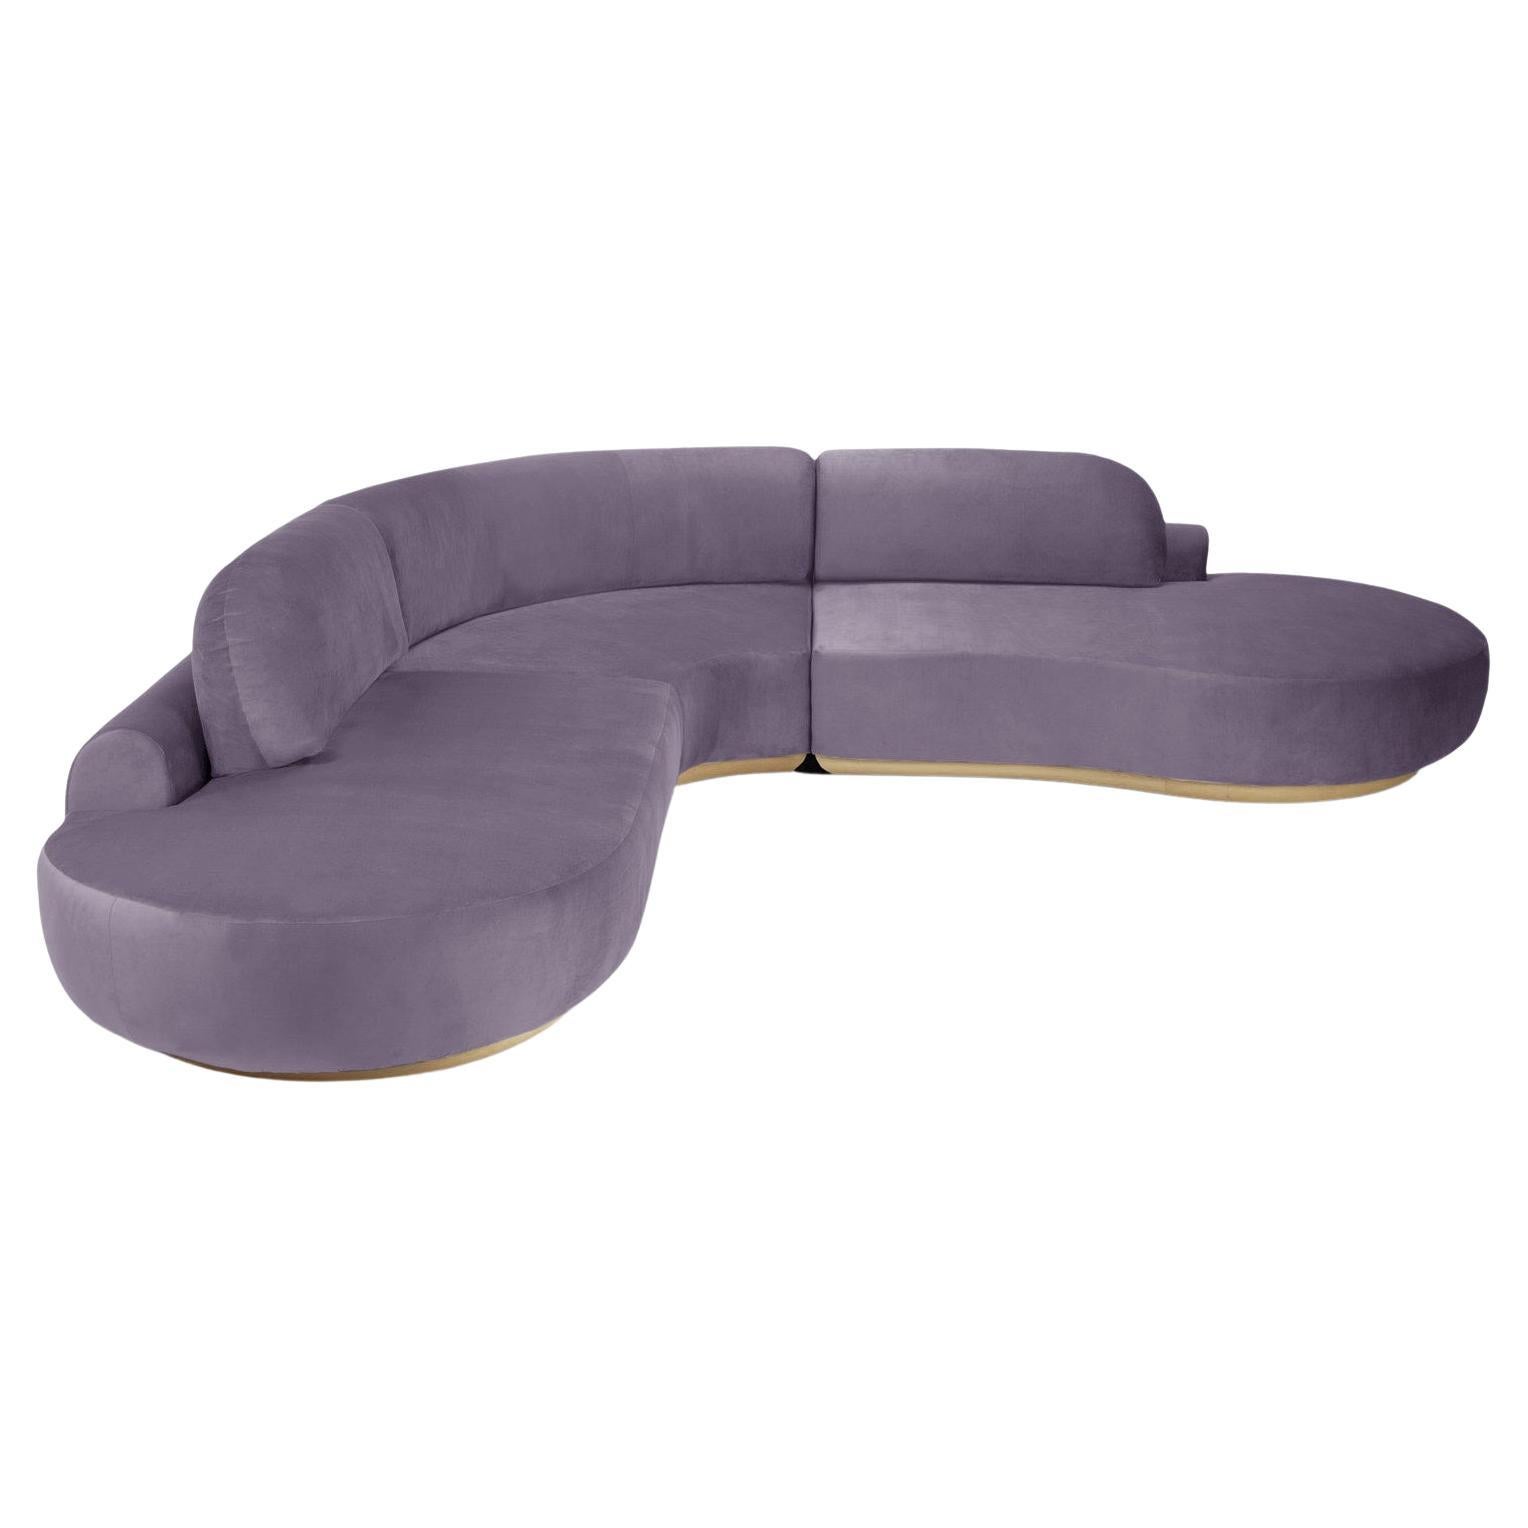 Naked Curved Sectional Sofa, 3 Piece with Natural Oak and Paris Lavanda